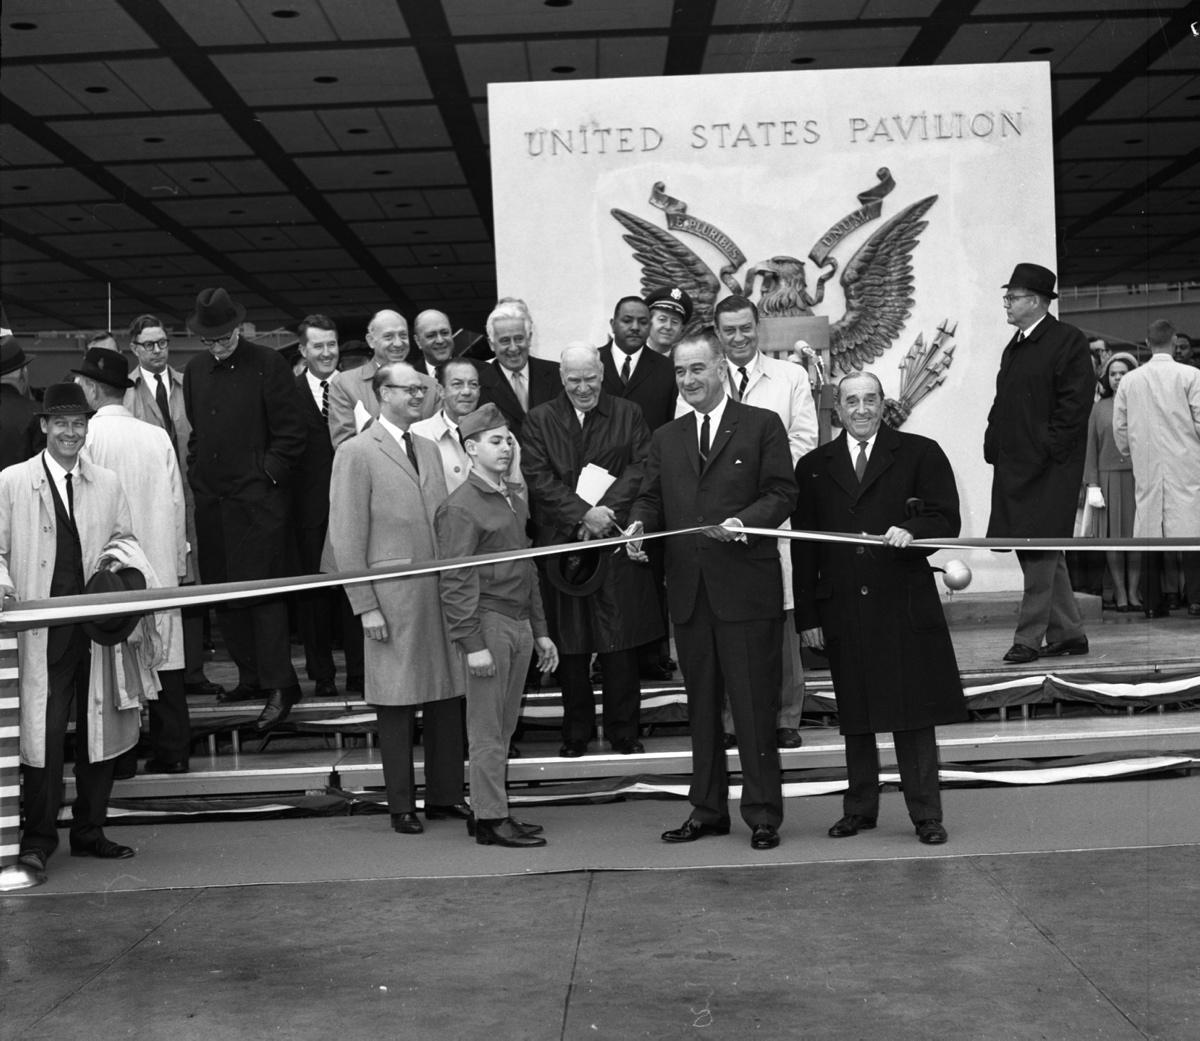 U.S. President Lyndon B. Johnson at the ribbon-cutting ceremony for the United States Pavilion in March 1964.